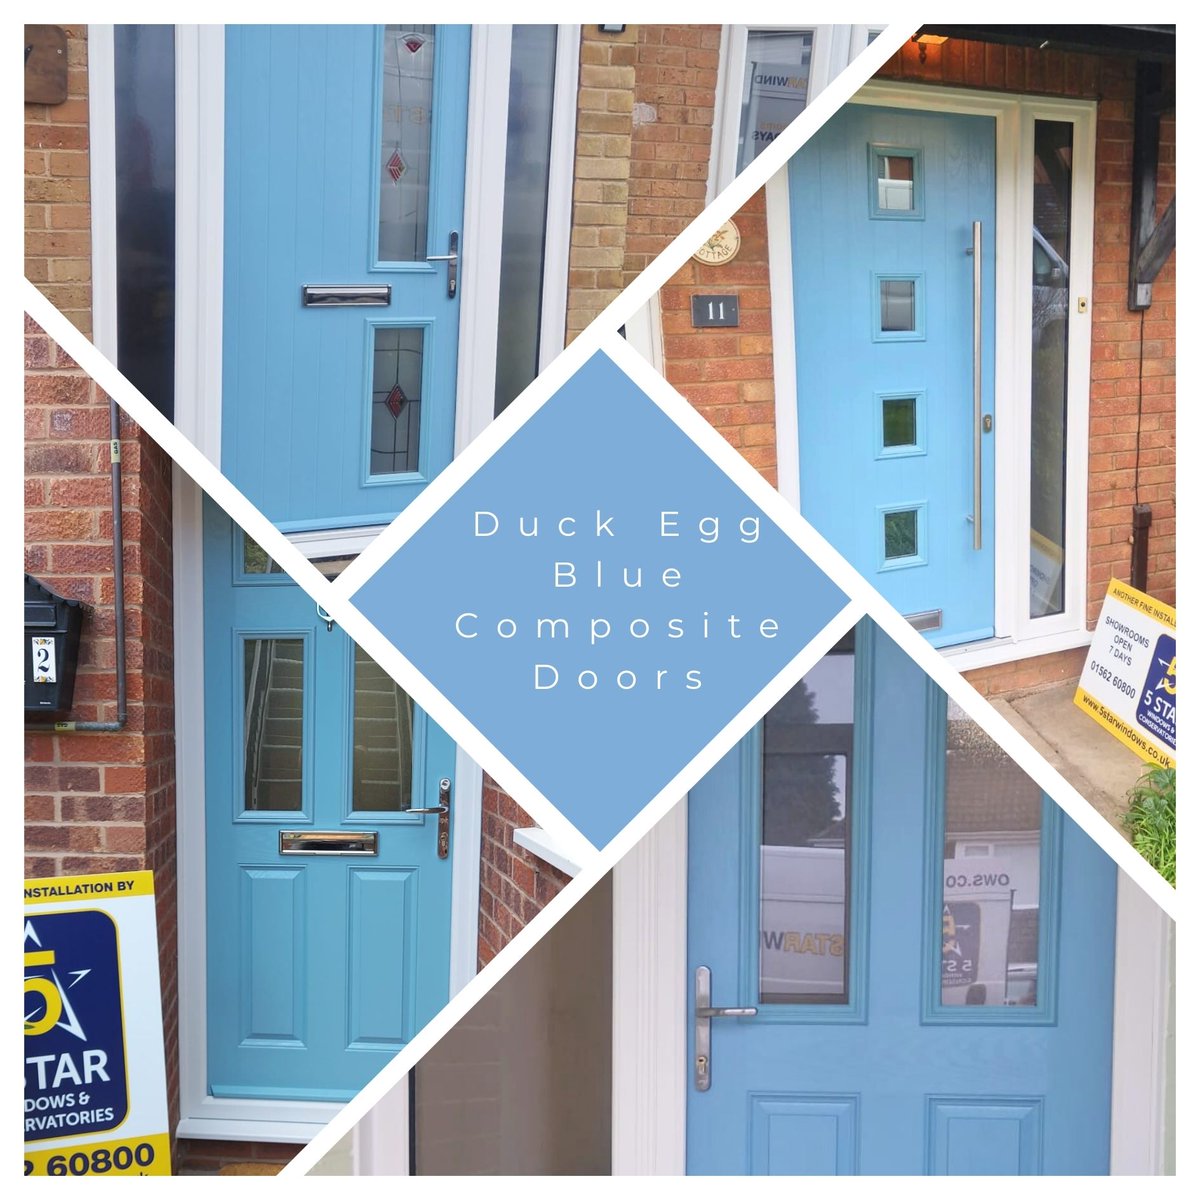 We do like to think outside of the box here at 5 Star so in addition to traditional favourite front door colours we also offer a selection of contemporary classics including anthracite grey, chartwell green...or even duck egg blue. 5starwindows.co.uk/free-quotation/ #GoodFriday